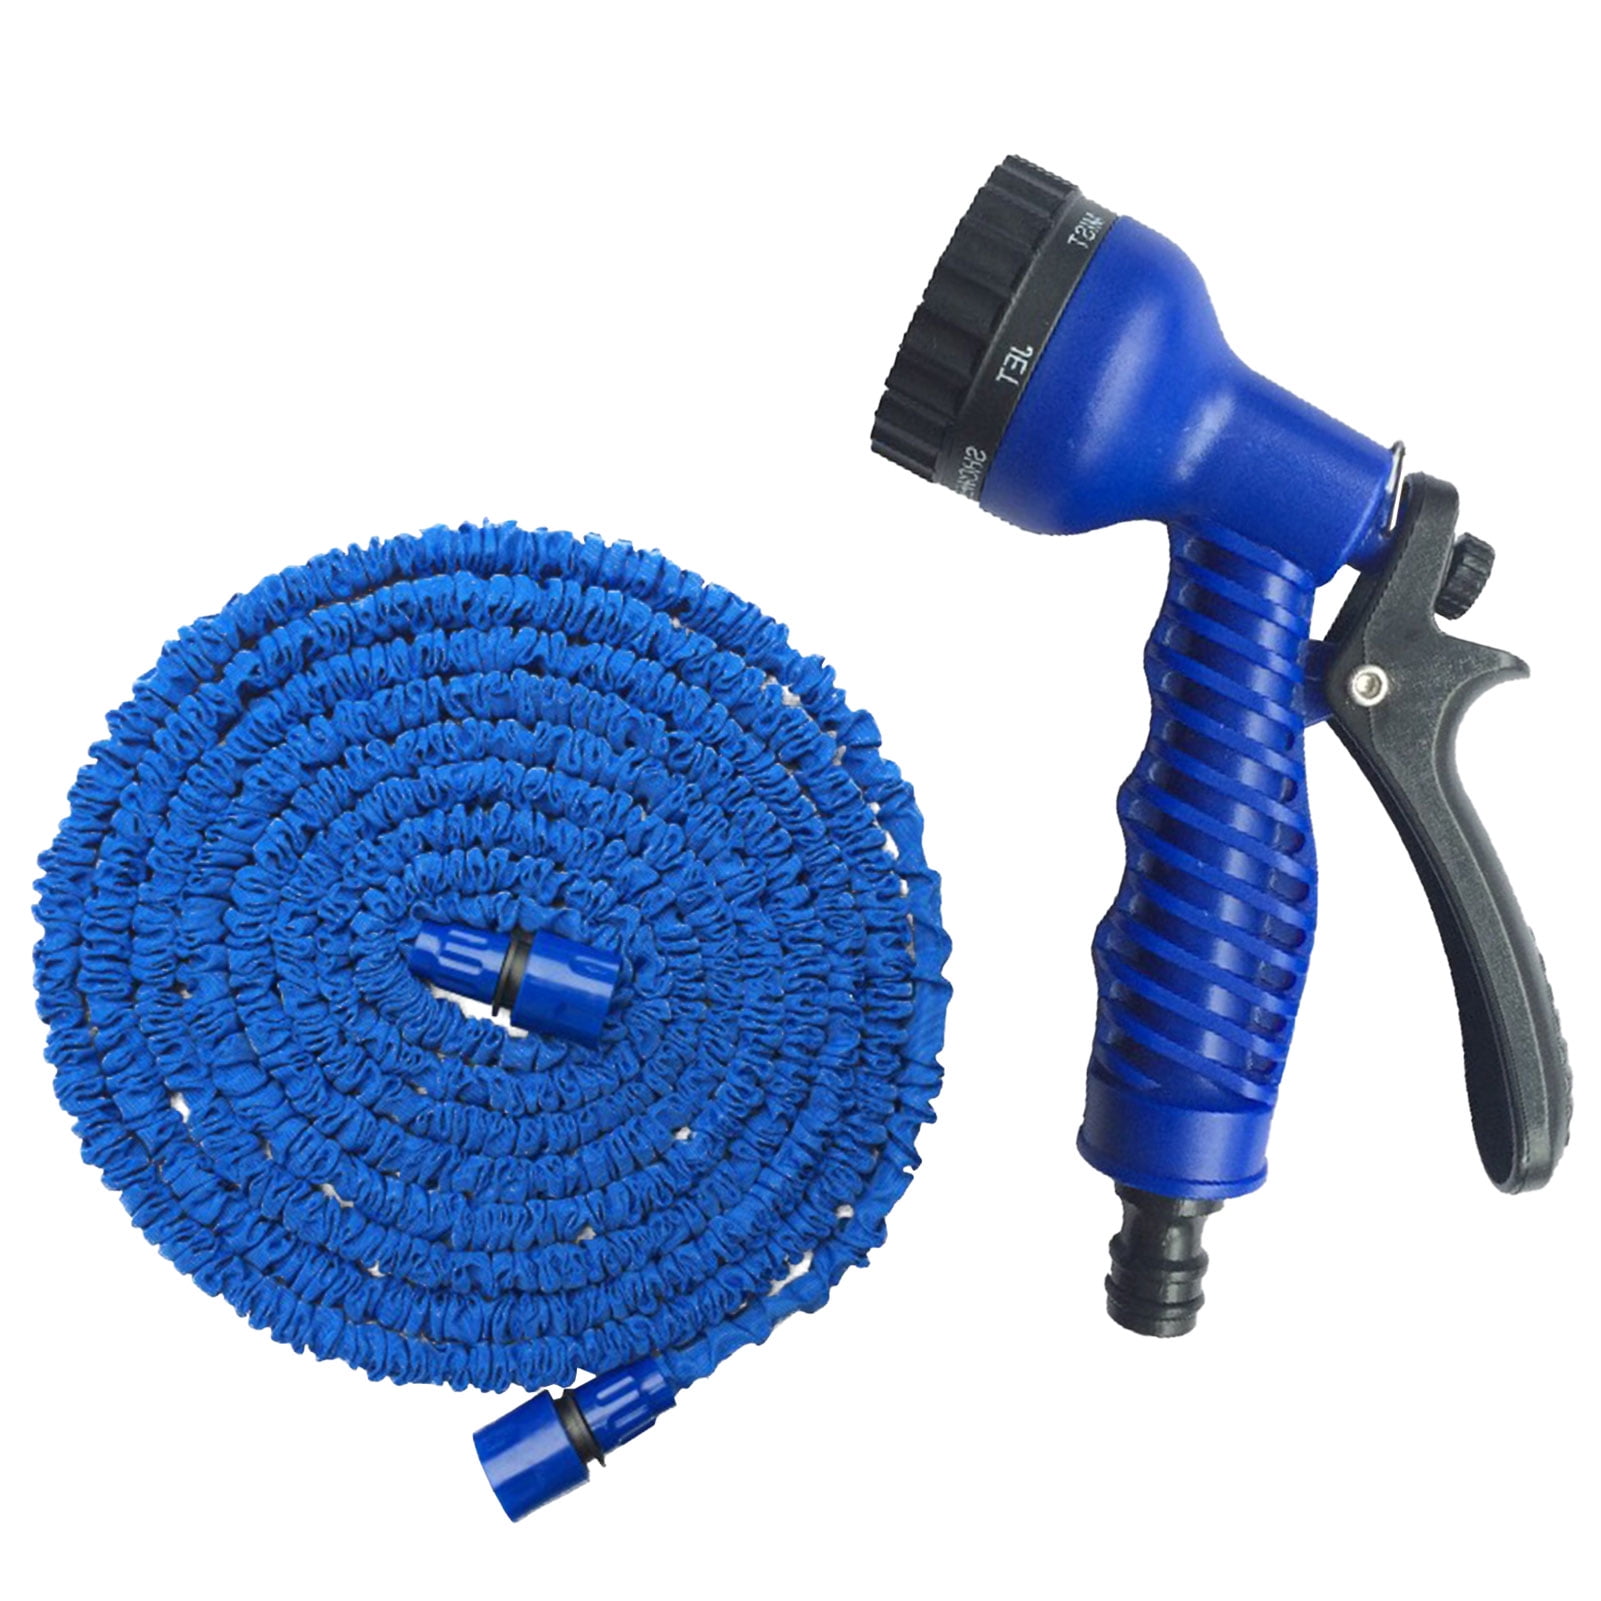 100 Ft Expendable Garden Water Hose Car Washing Watering Flexible Hosepipe Tool 